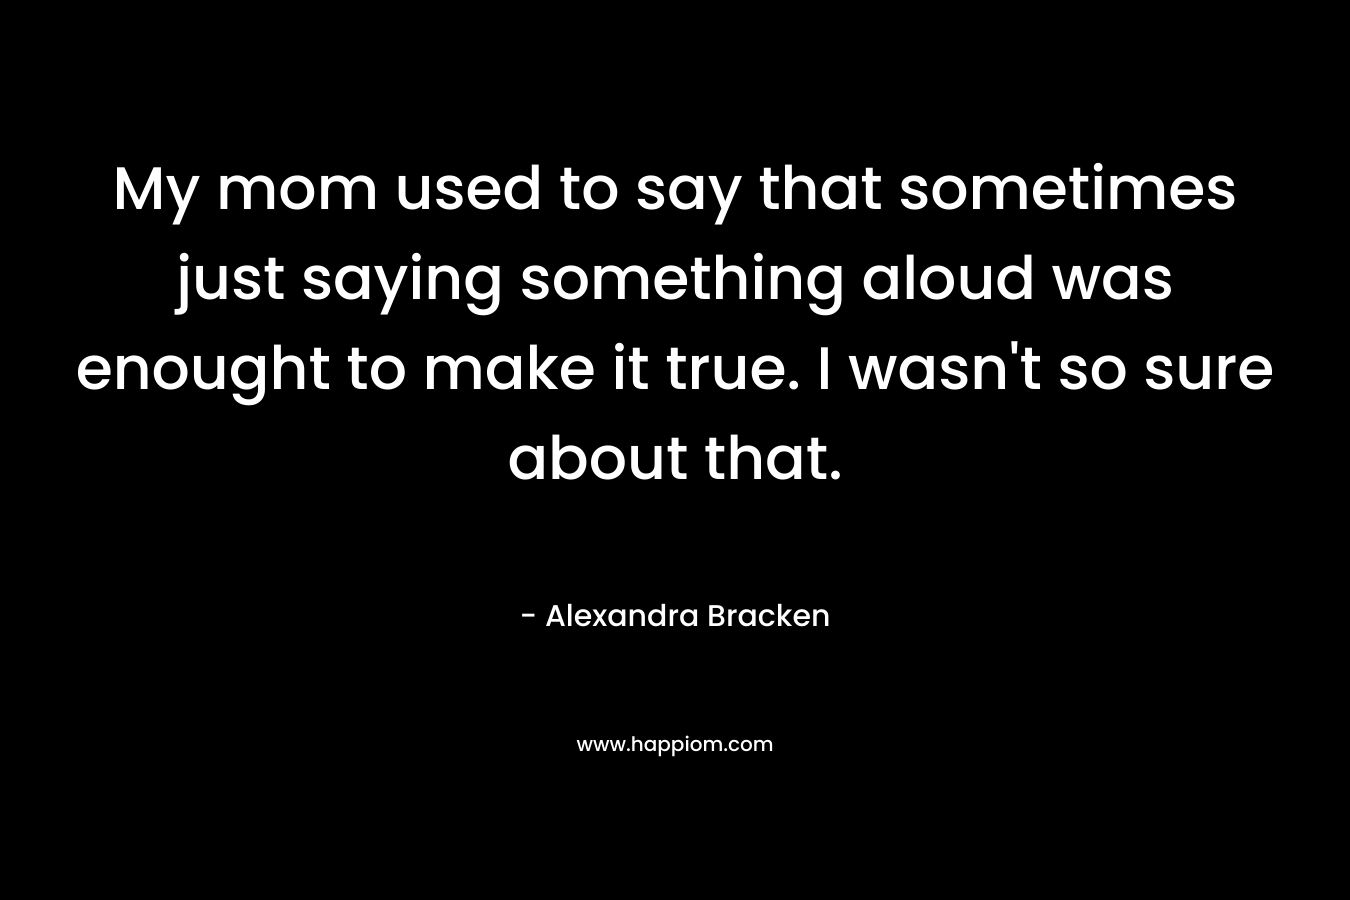 My mom used to say that sometimes just saying something aloud was enought to make it true. I wasn't so sure about that.